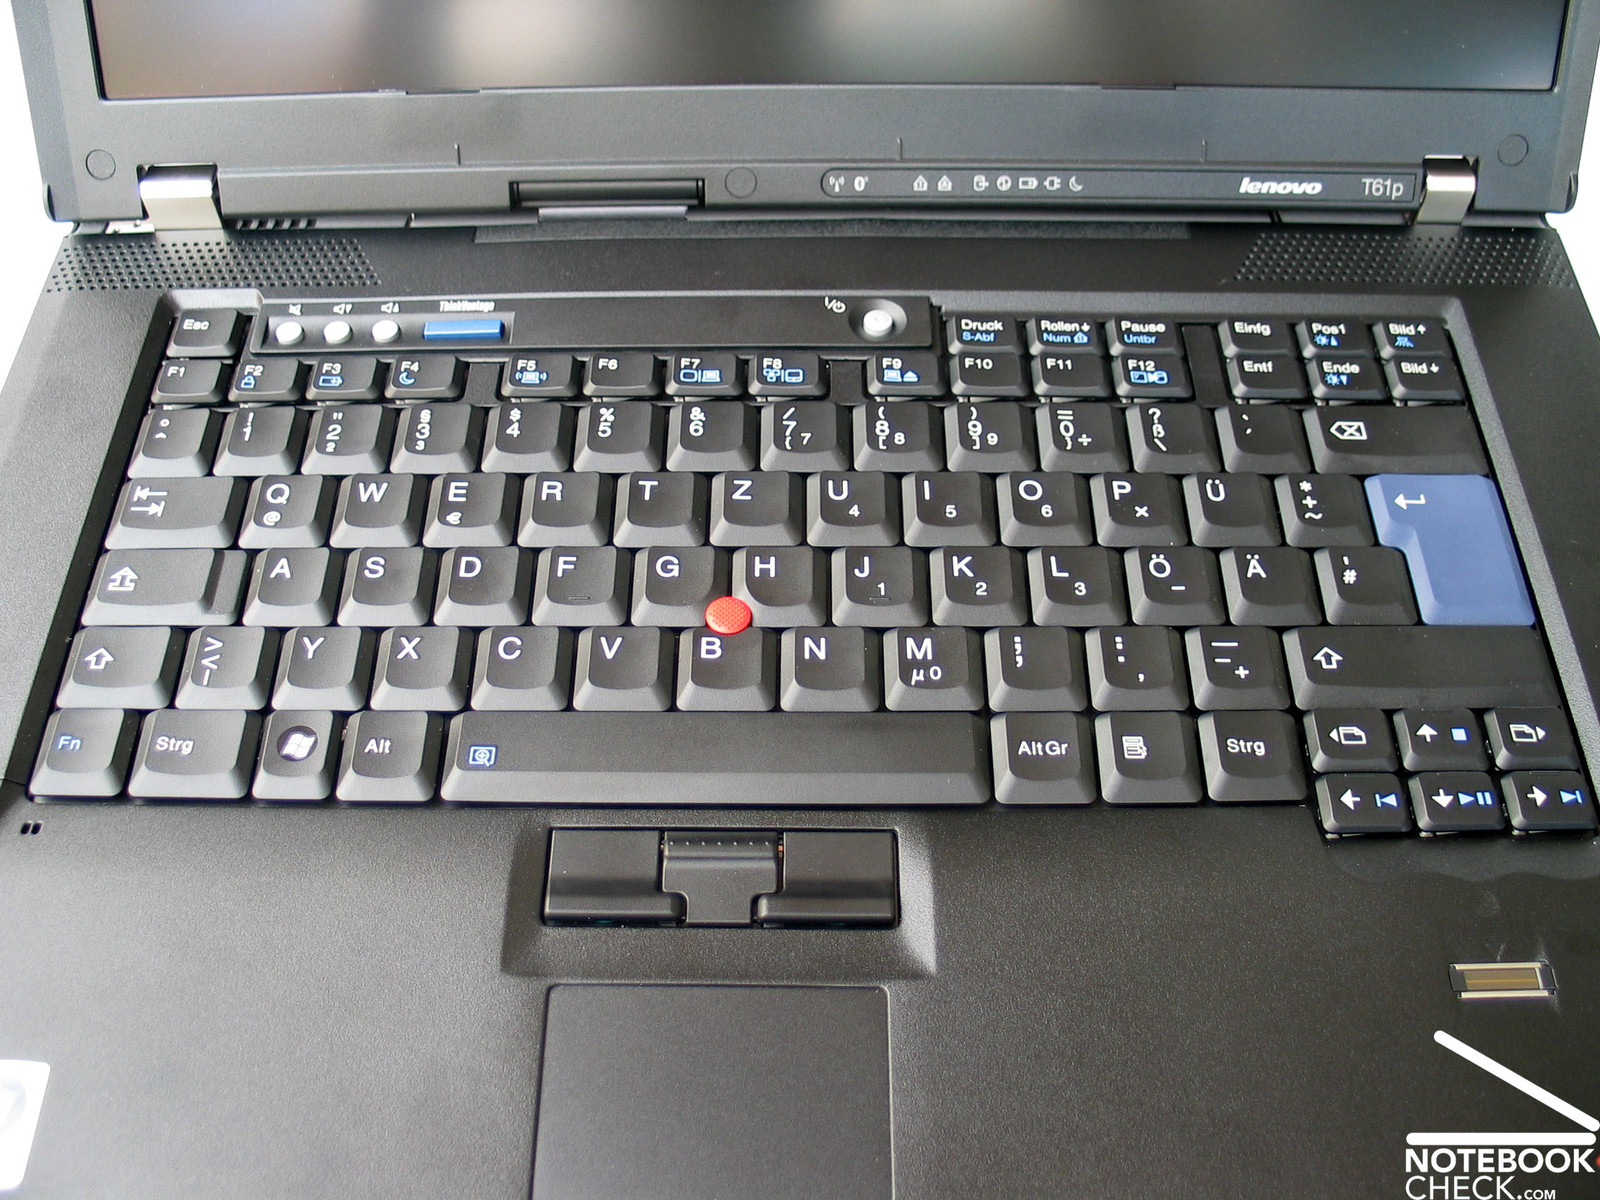 Review Lenovo Thinkpad T61p Notebook - NotebookCheck.net Reviews